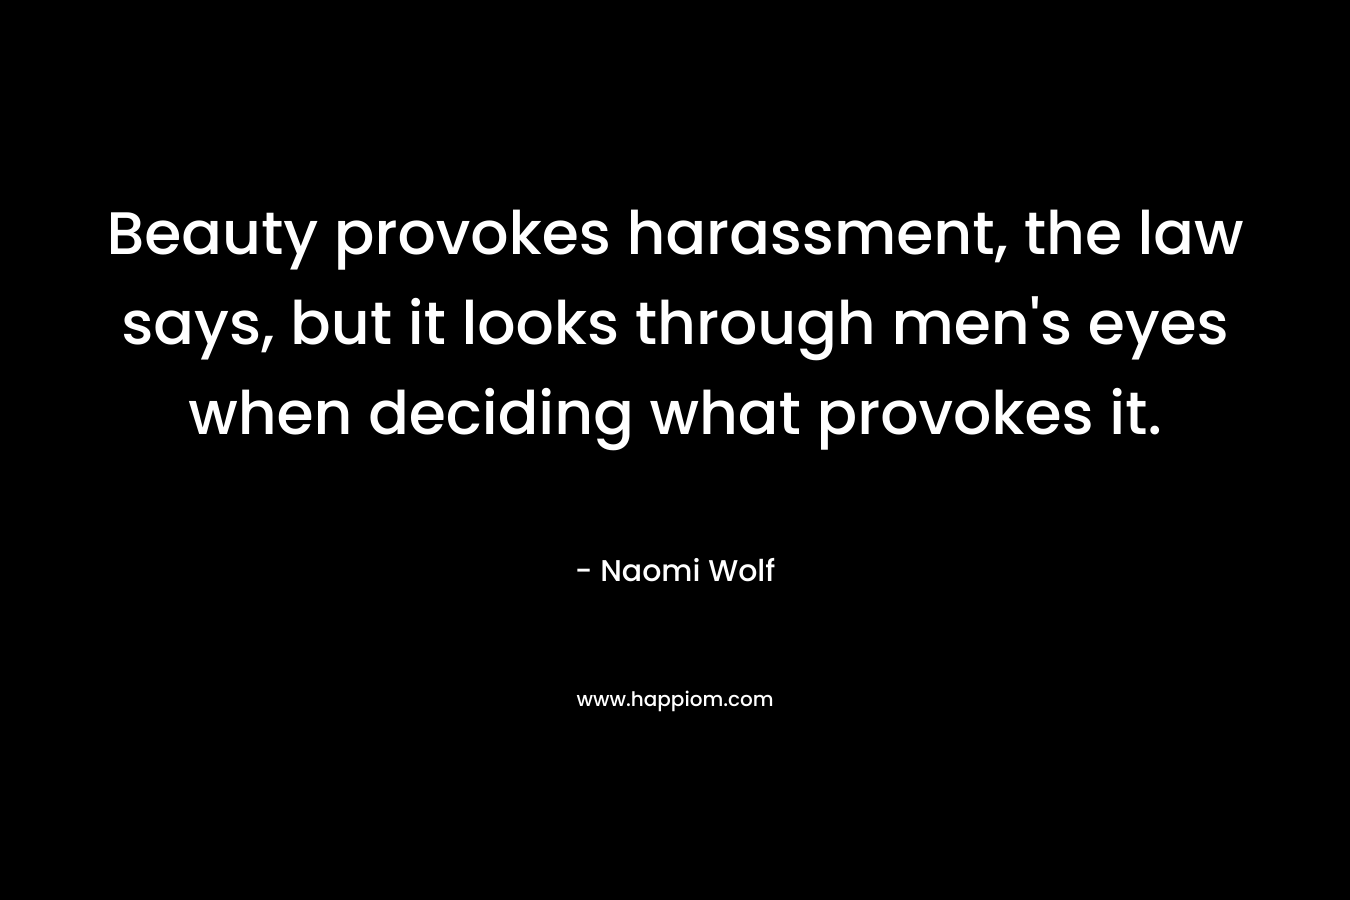 Beauty provokes harassment, the law says, but it looks through men’s eyes when deciding what provokes it. – Naomi Wolf